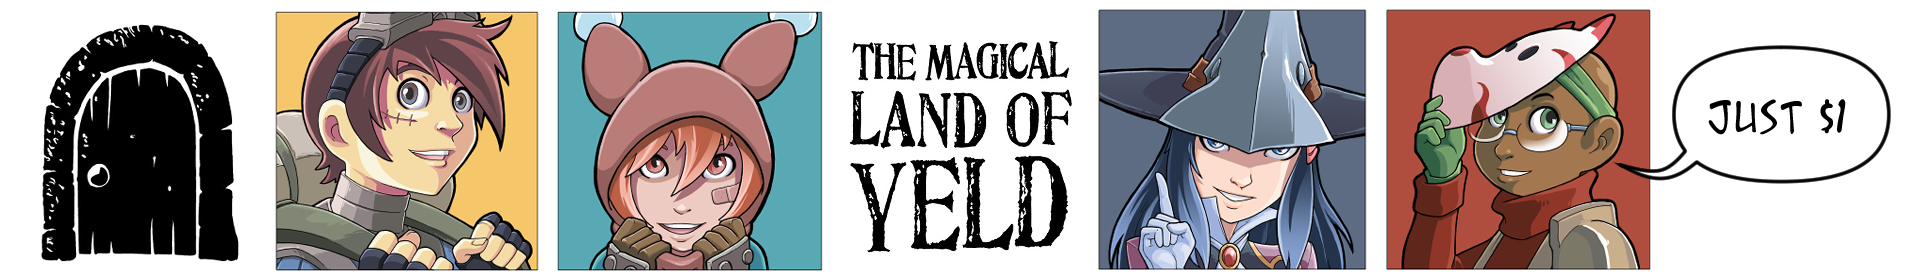 The Magical Land of Yeld